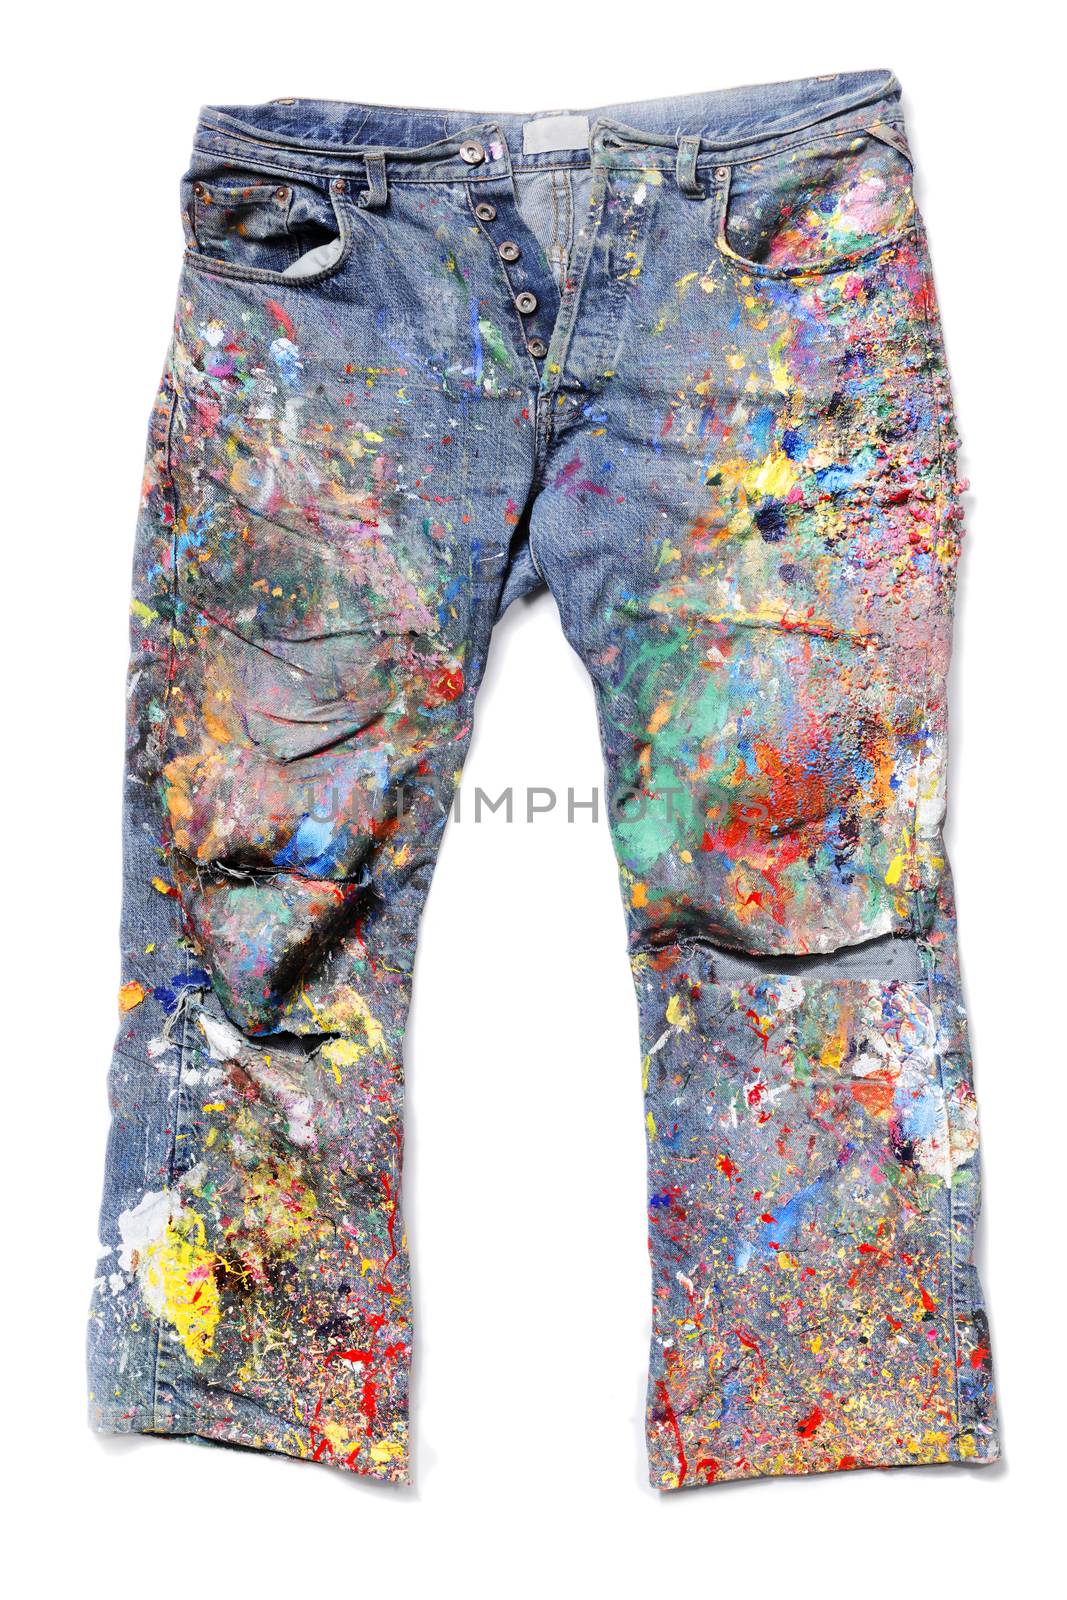 Jeans of an Artist by Stocksnapper